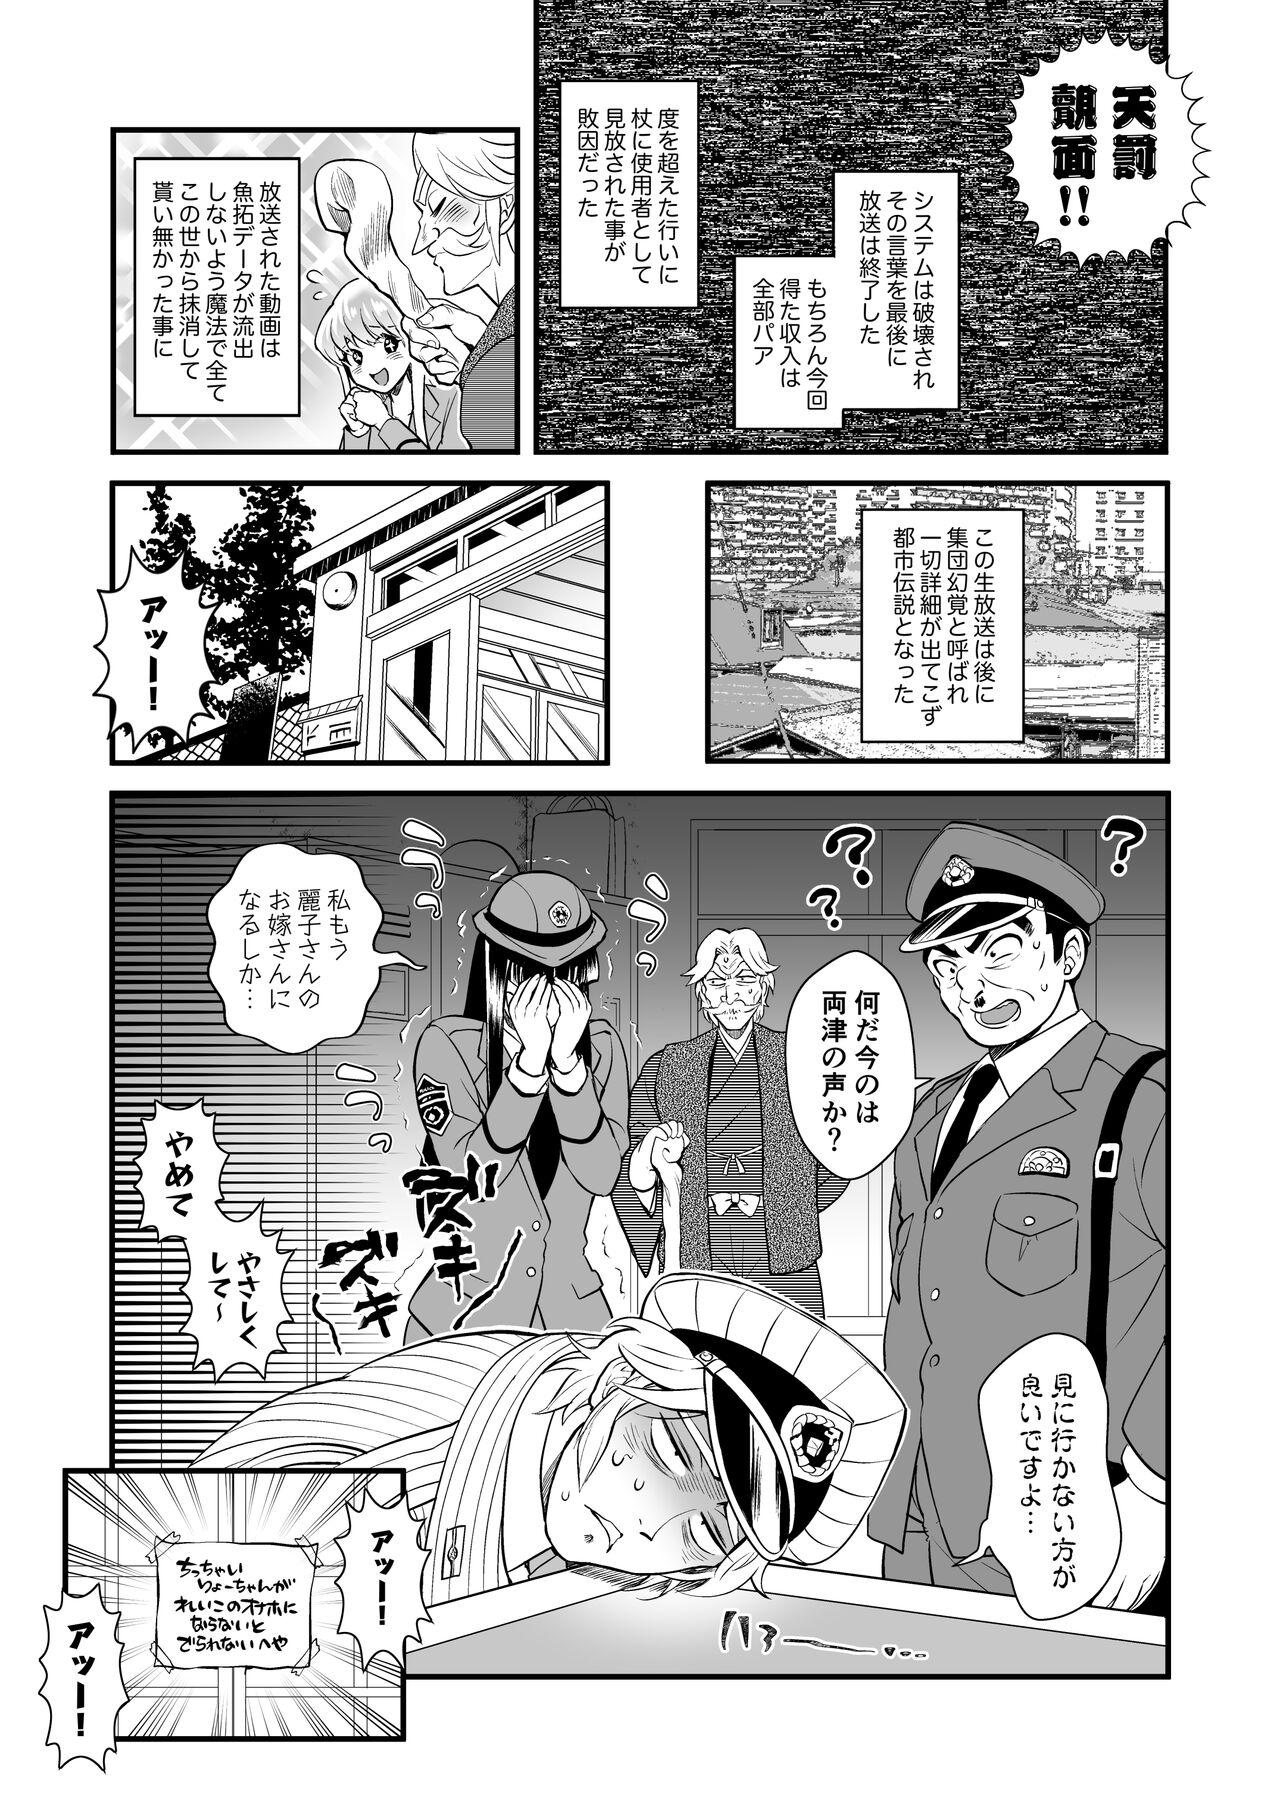 Volume of the room where Reiko & Maria & Nakagawa can't leave unless they do something crazy 40